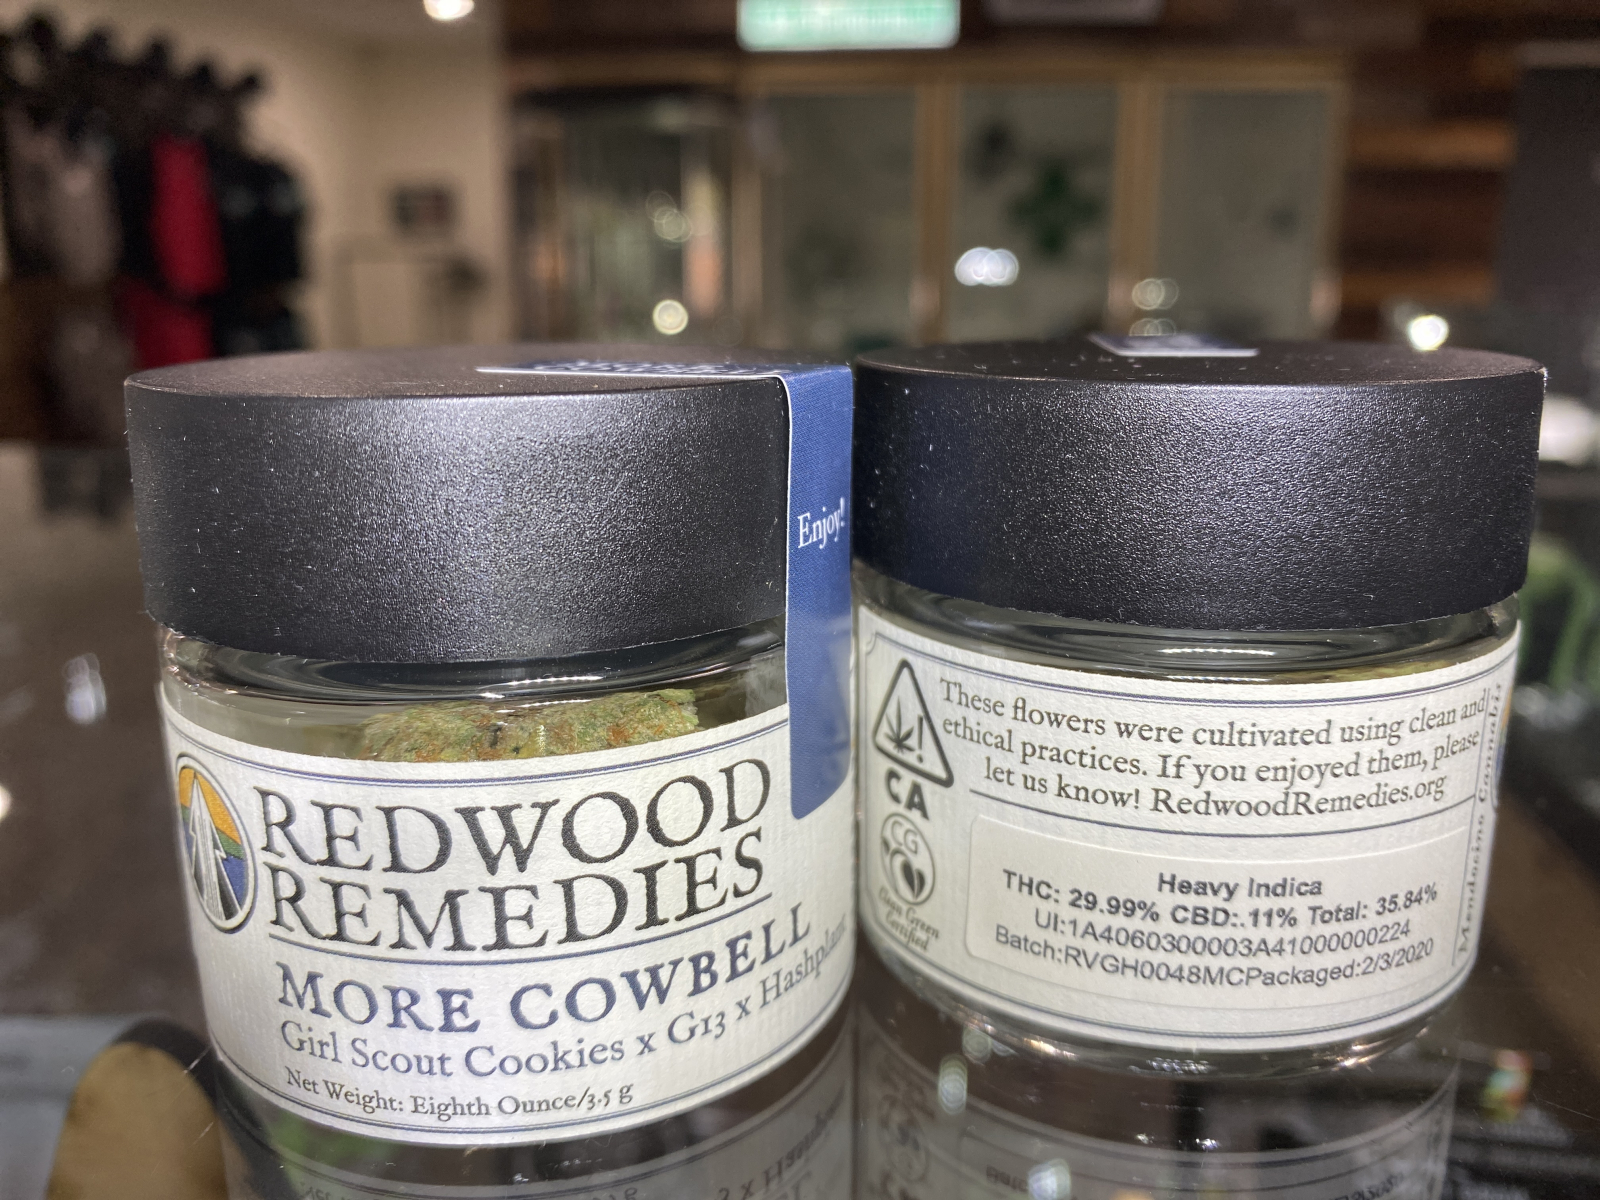 Redwood Remedies More Cowbell 1/8th